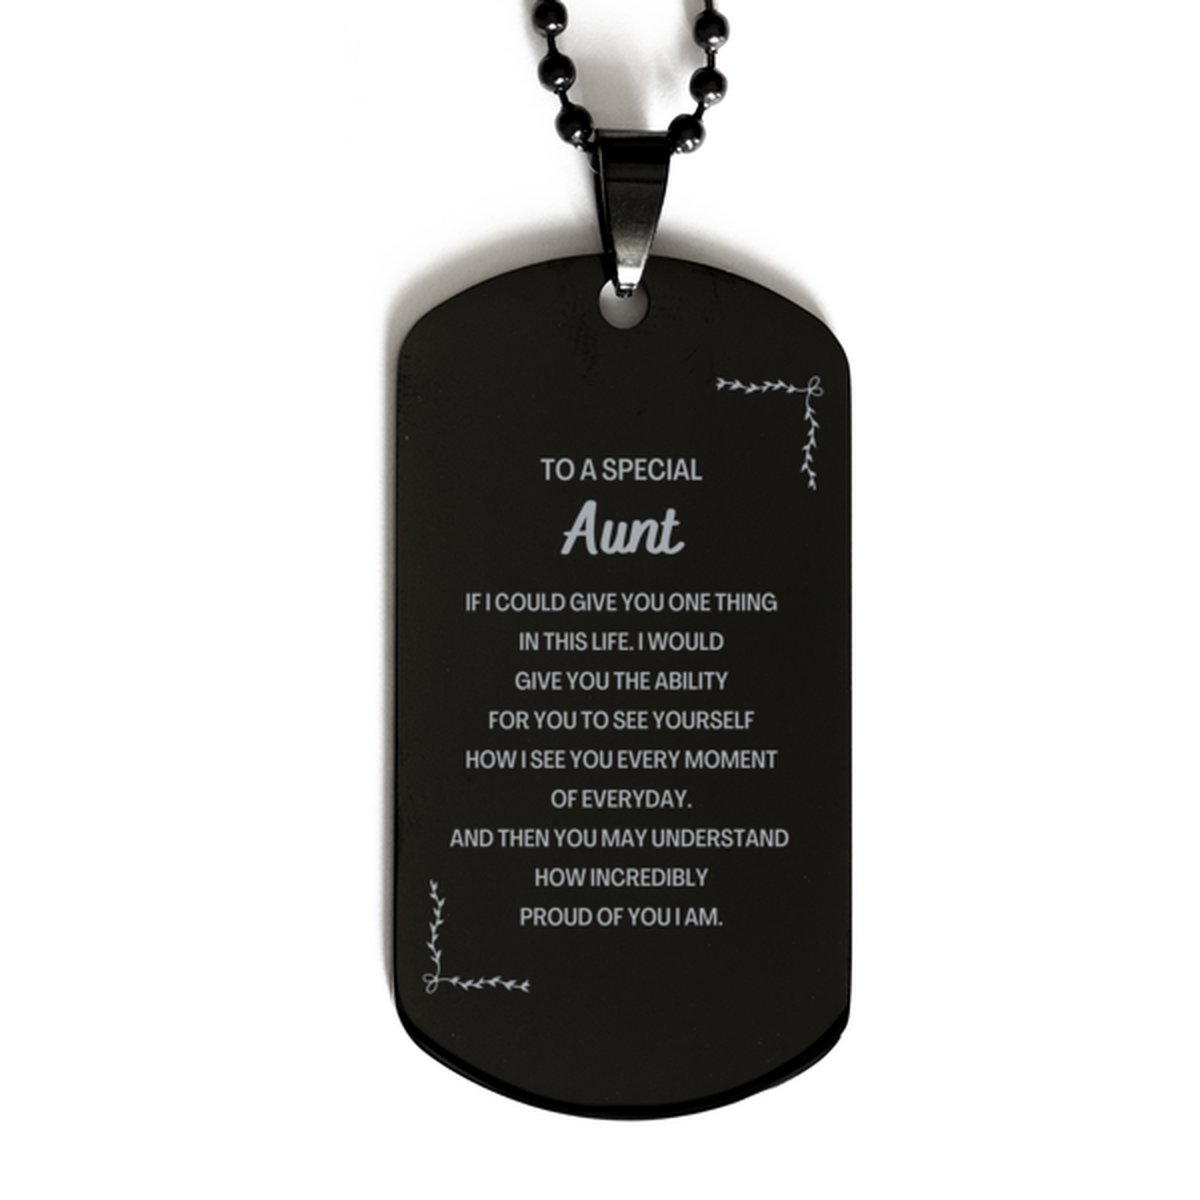 To My Aunt Black Dog Tag, Gifts For Aunt Engraved, Inspirational Gifts for Christmas Birthday, Epic Gifts for Aunt To A Special Aunt how incredibly proud of you I am